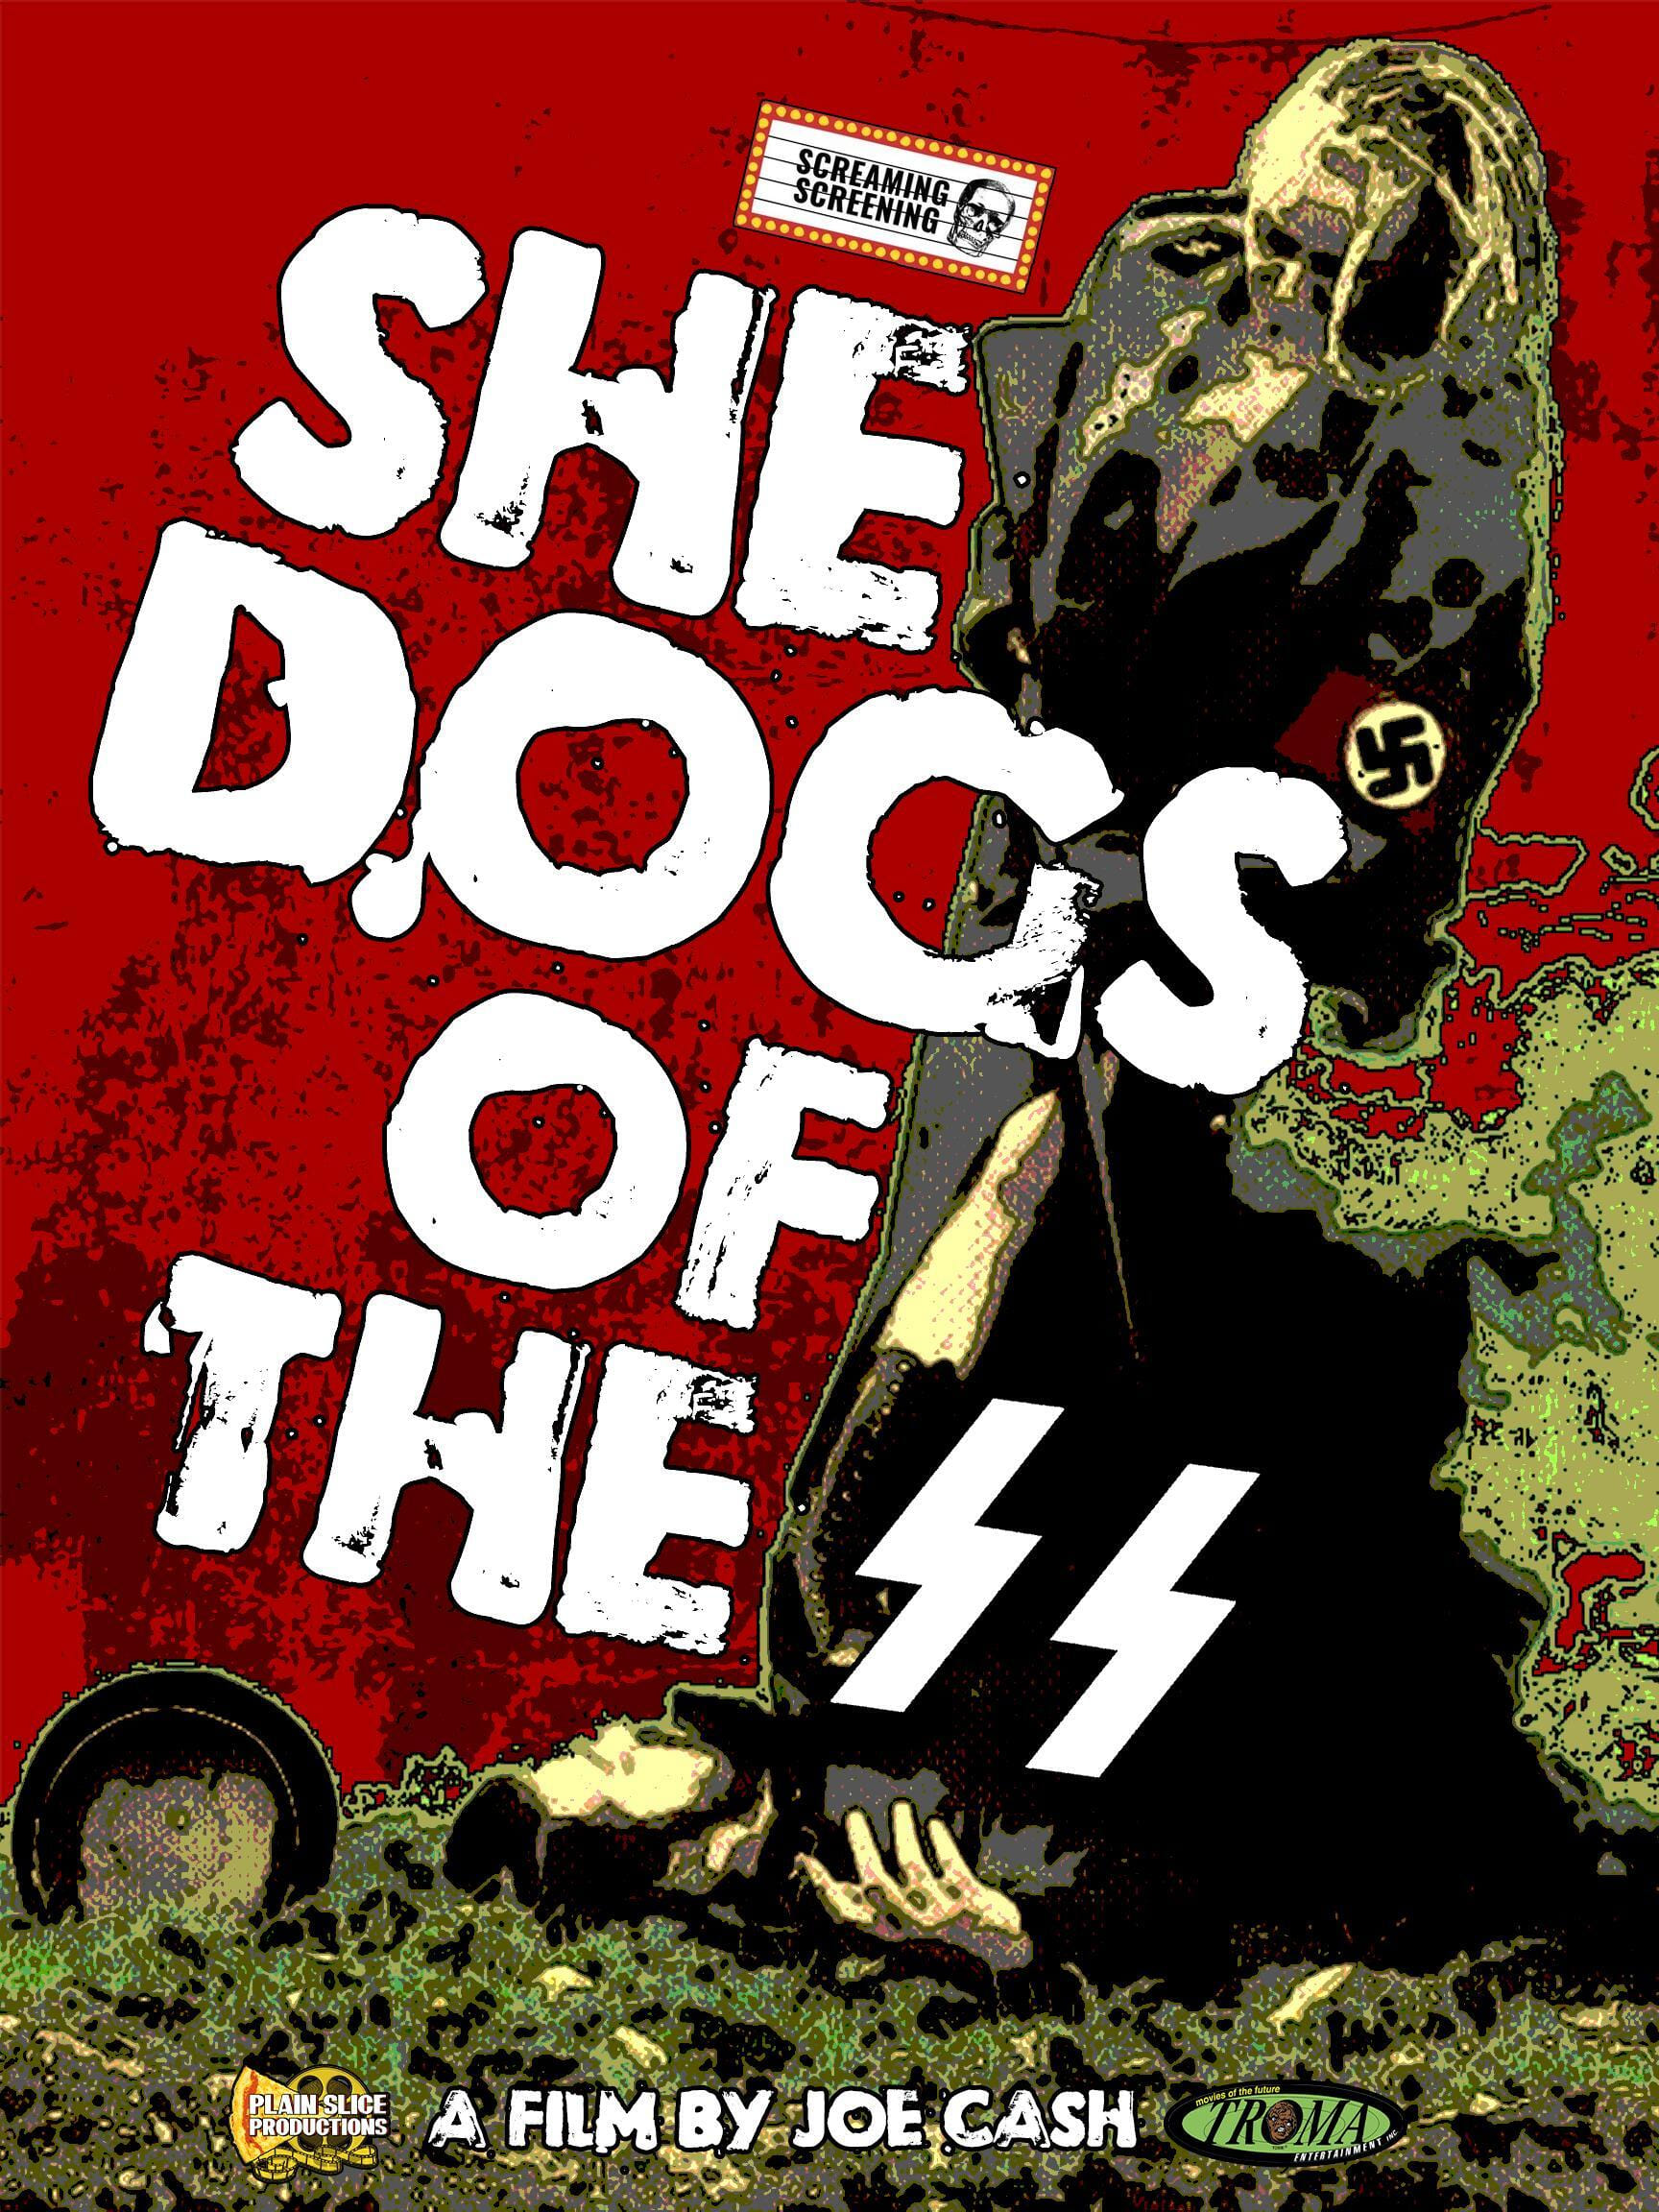 She Dogs of the SS